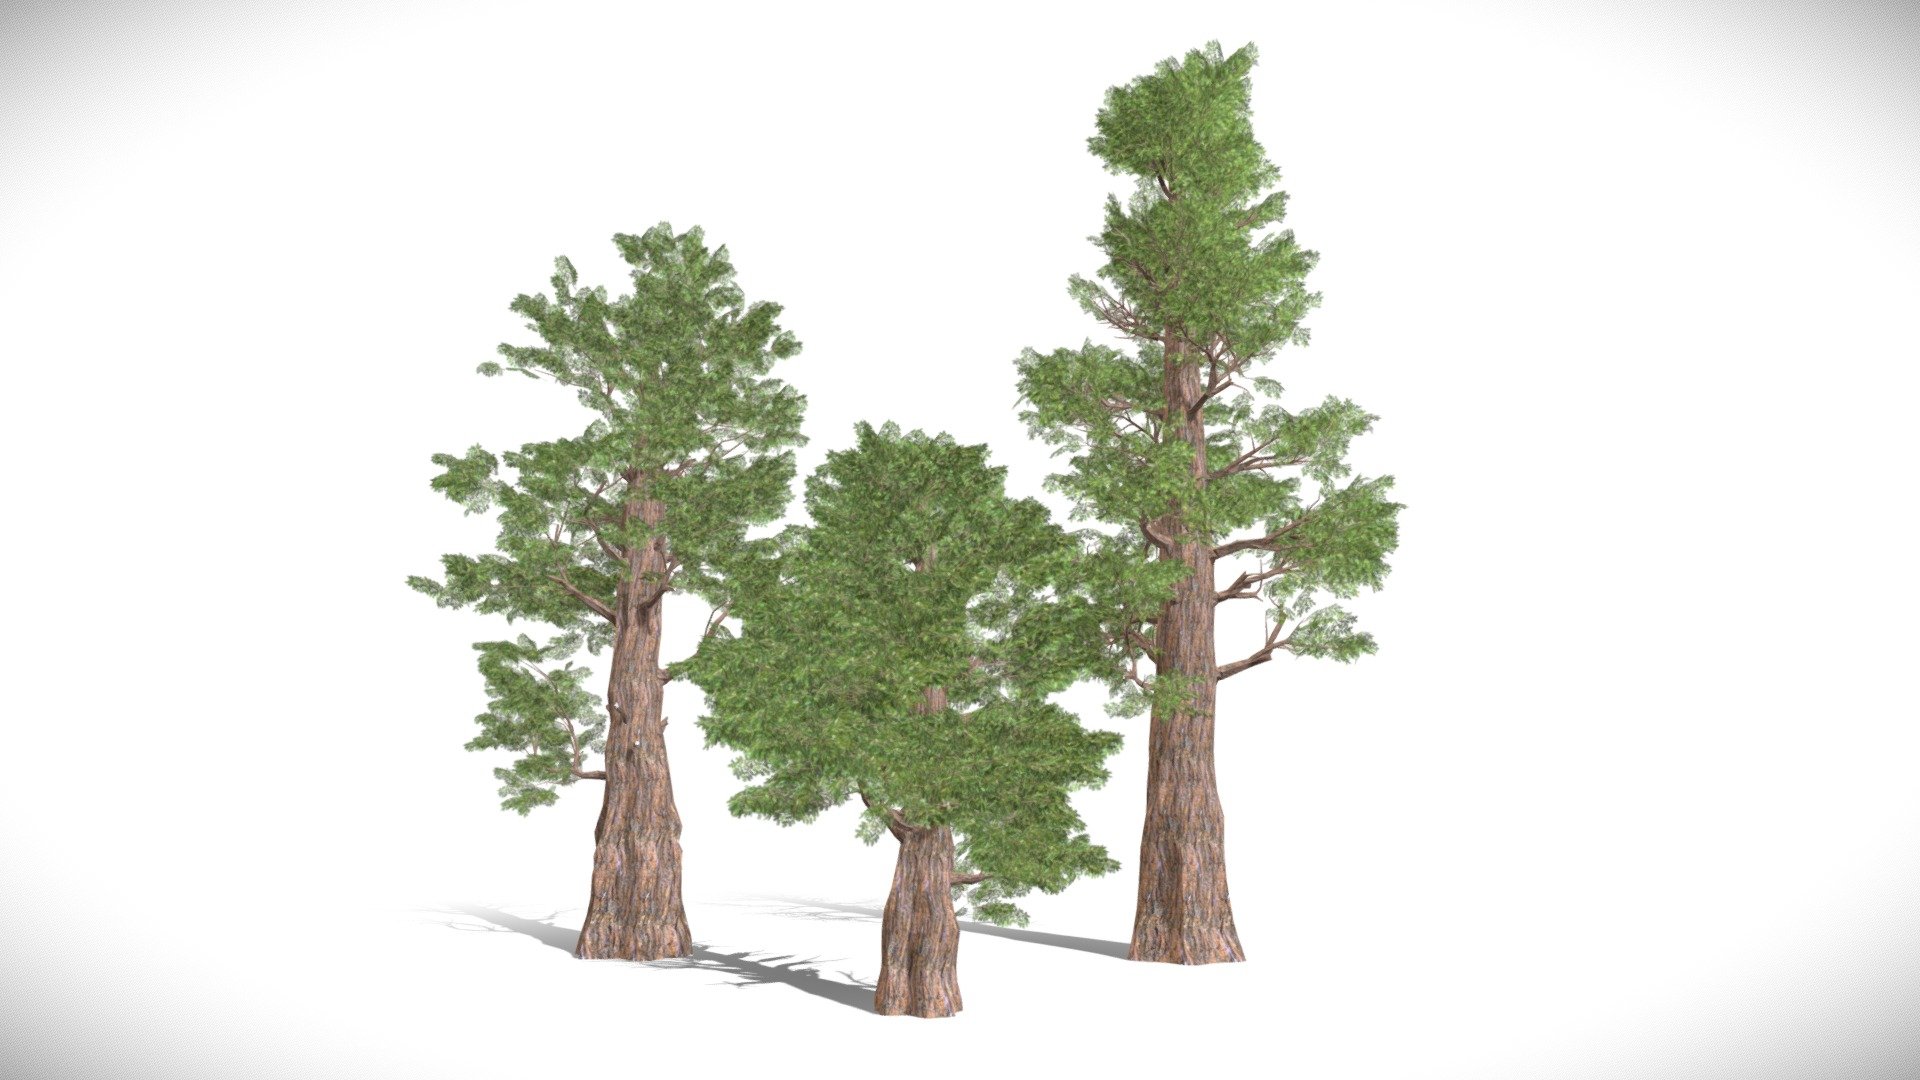 Highly detailed 3d model of giant sequoia Redwood trees of 3 different heights.
tree model collection of 3 redwoods dawn redwood, medium and tall redwood tree heights and size. 
Sequoioideae, popularly known as redwoods, is a subfamily of coniferous trees within the family Cupressaceae. It includes the largest and tallest trees in the world.

High-Resolution and real texture to give realistic and faster rendering. Perfect model for renders summer nature environment, forest exterior architecture and environment visualization 3d models. Give superb look in gaming engine. triangle poly and clean polygons

Total Polygons: 81466
Total Verts of all trees: 69507

Single Poly:
small tree: 17334
Medium tree: 14994
Tall tree: 49138

Dimensions :
height: 48 - 90 -  113 m

Clean Topology
Most models are up to 99% Quad
All Objects Named
All Materials Named
Real-World Scale
Grouped
Transformed to Zero - Giant sequoia Redwood trees - 3D model by hkhalif 3d model